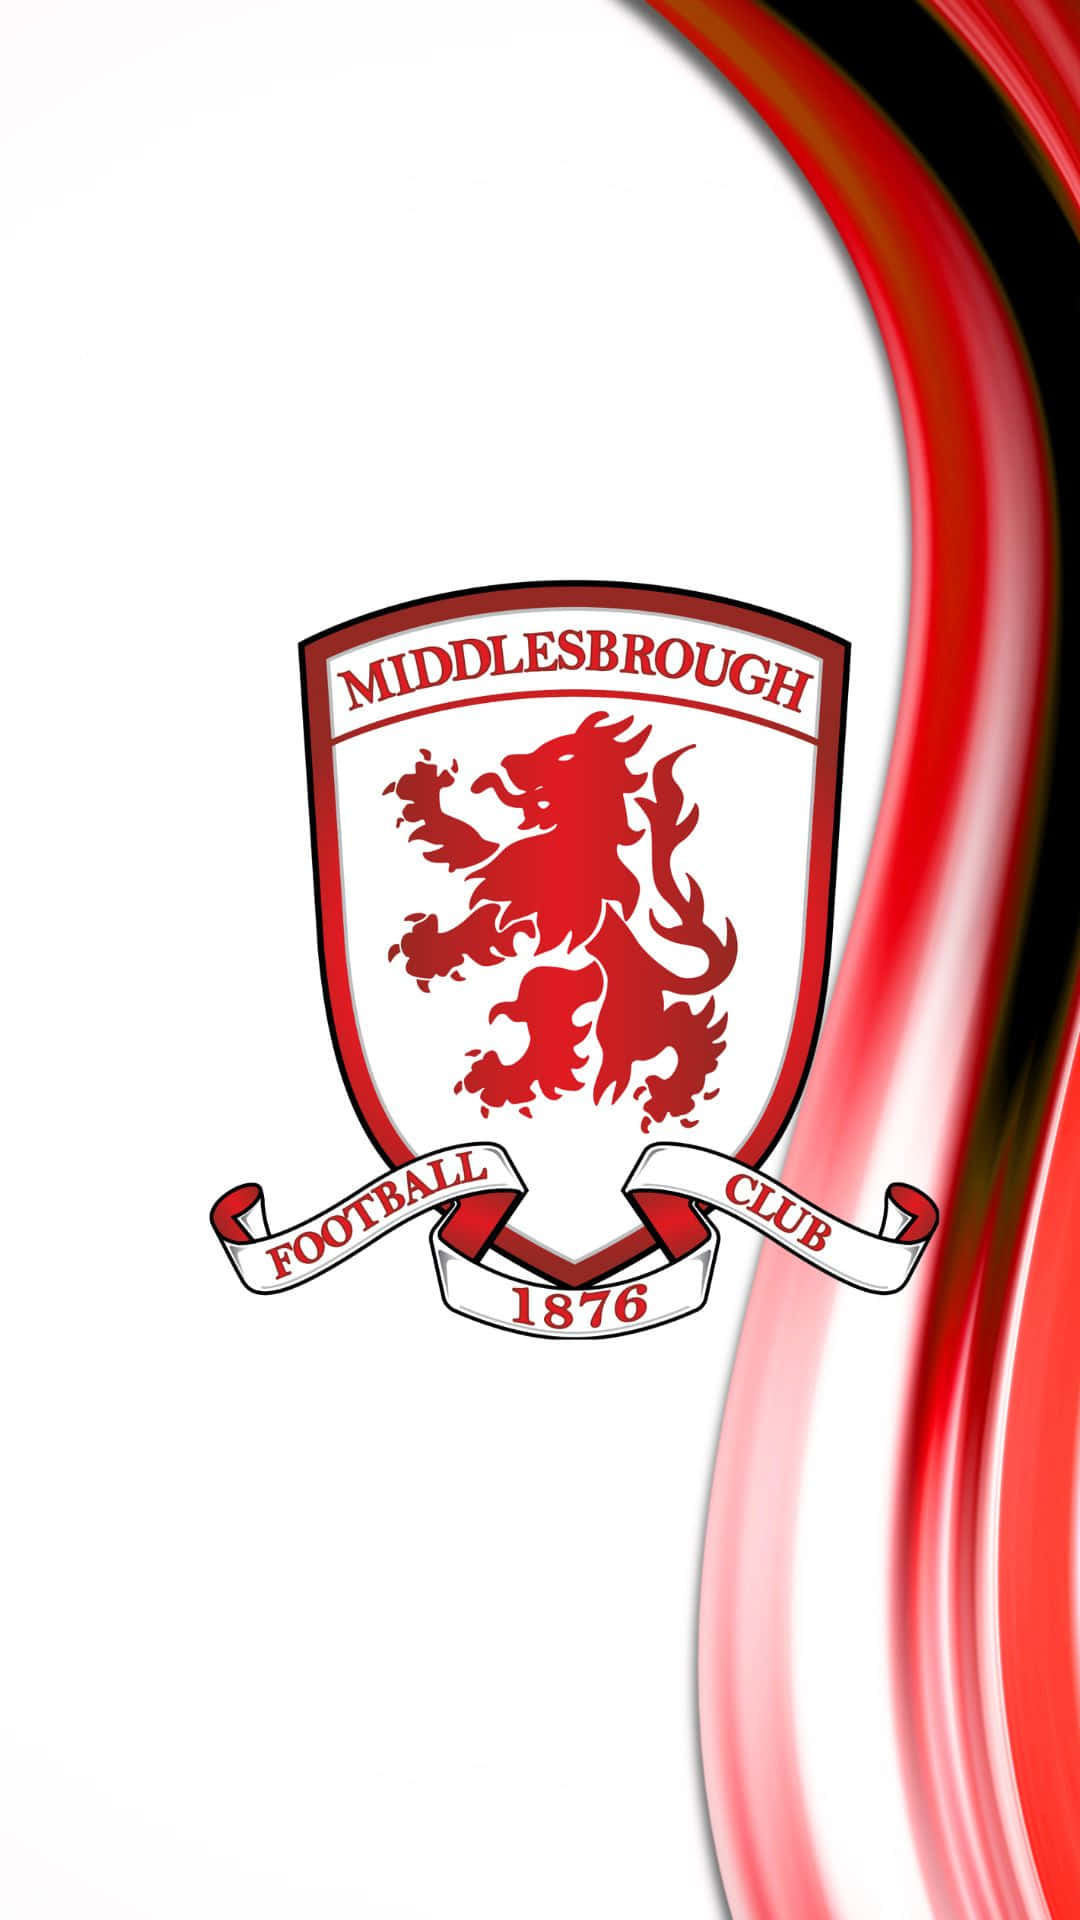 100+] Middlesbrough Wallpapers | Wallpapers.com